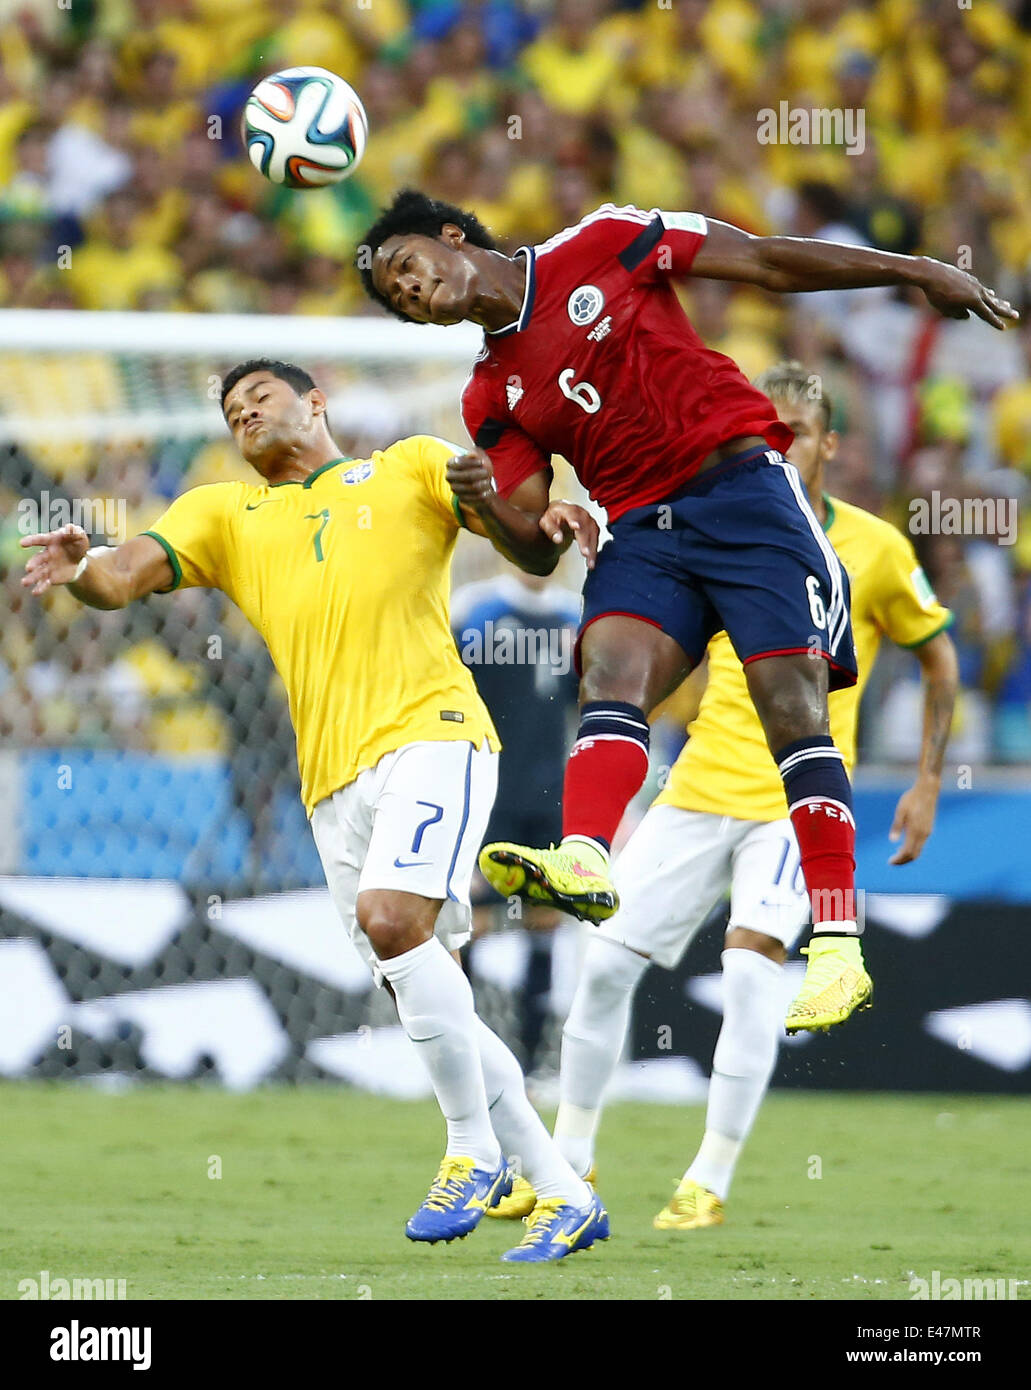 Fortaleza, Brazil. 4th July, 2014. Brazil's Hulk competes for a header with Colombia's Carlos Sanchez during a quarter-finals match between Brazil and Colombia of 2014 FIFA World Cup at the Estadio Castelao Stadium in Fortaleza, Brazil, on July 4, 2014. Credit:  Chen Jianli/Xinhua/Alamy Live News Stock Photo